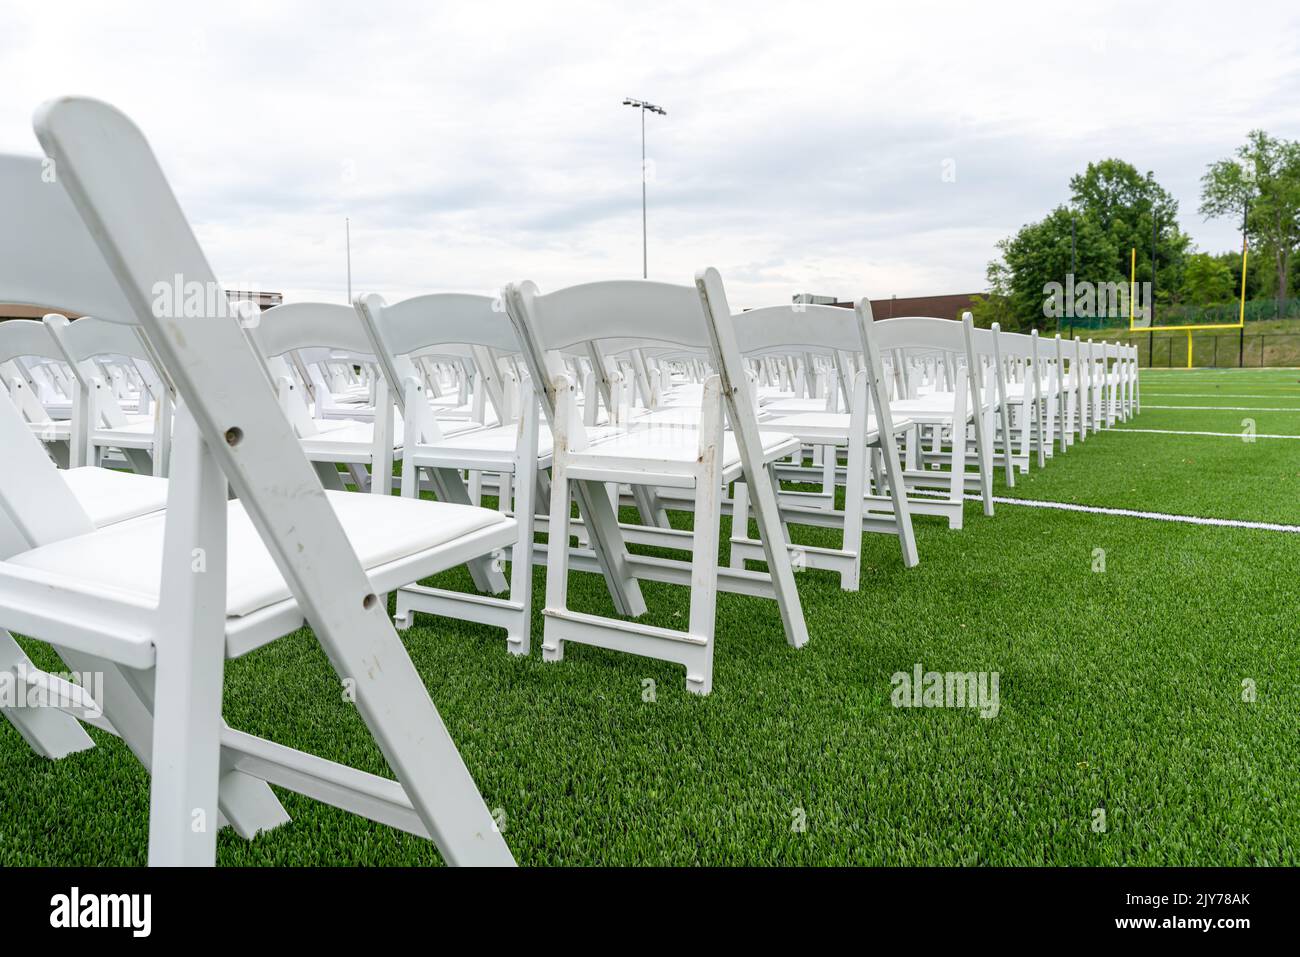 White chairs set-up in rows on a green synthetic turf athletic field for a high school graduation ceremony. Stock Photo